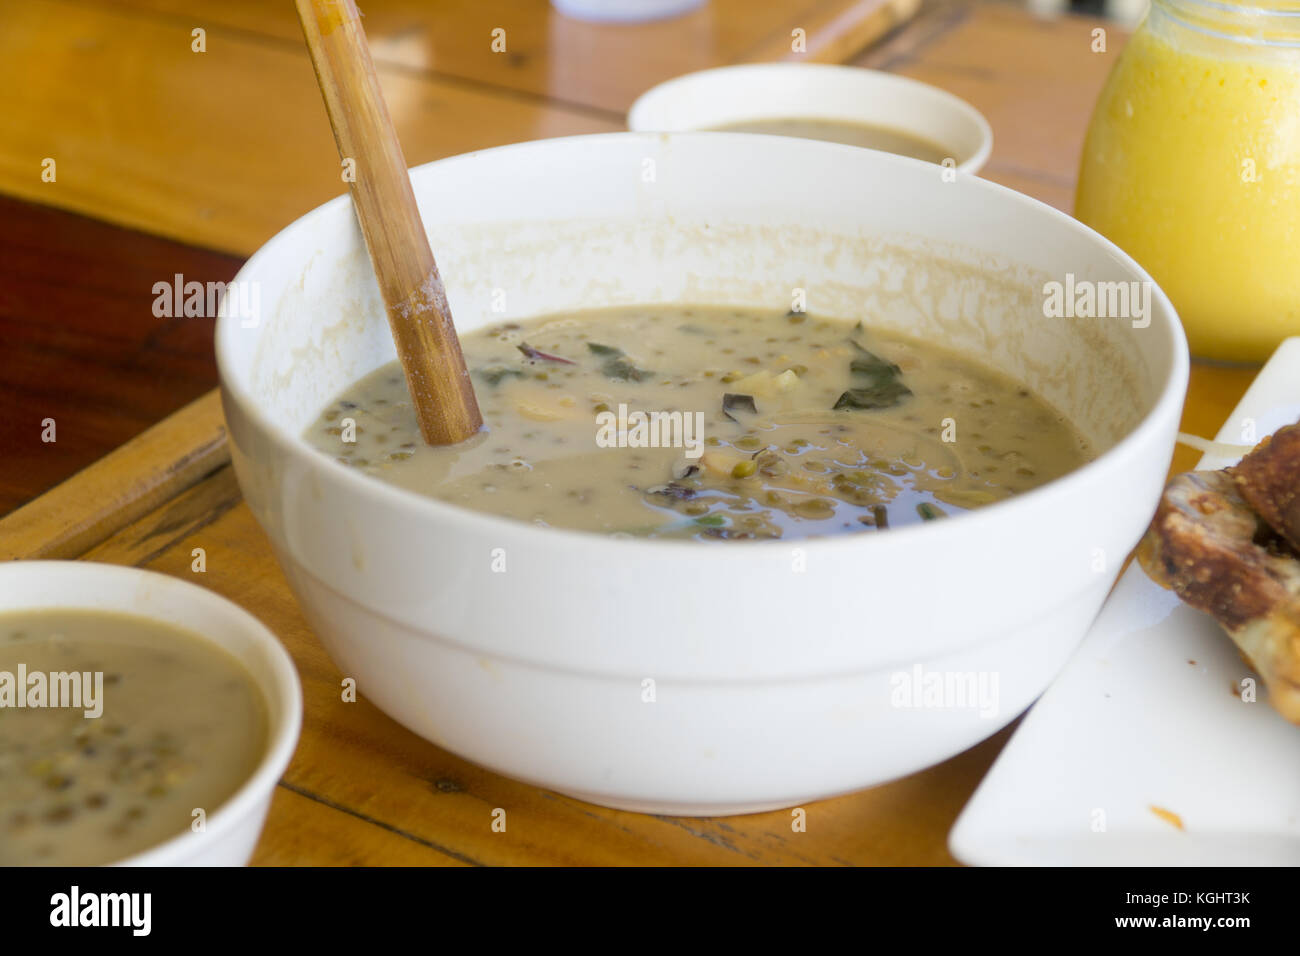 A bowl of Ginisang Munggo soup - a common traditional dish served in the Philippines. Stock Photo